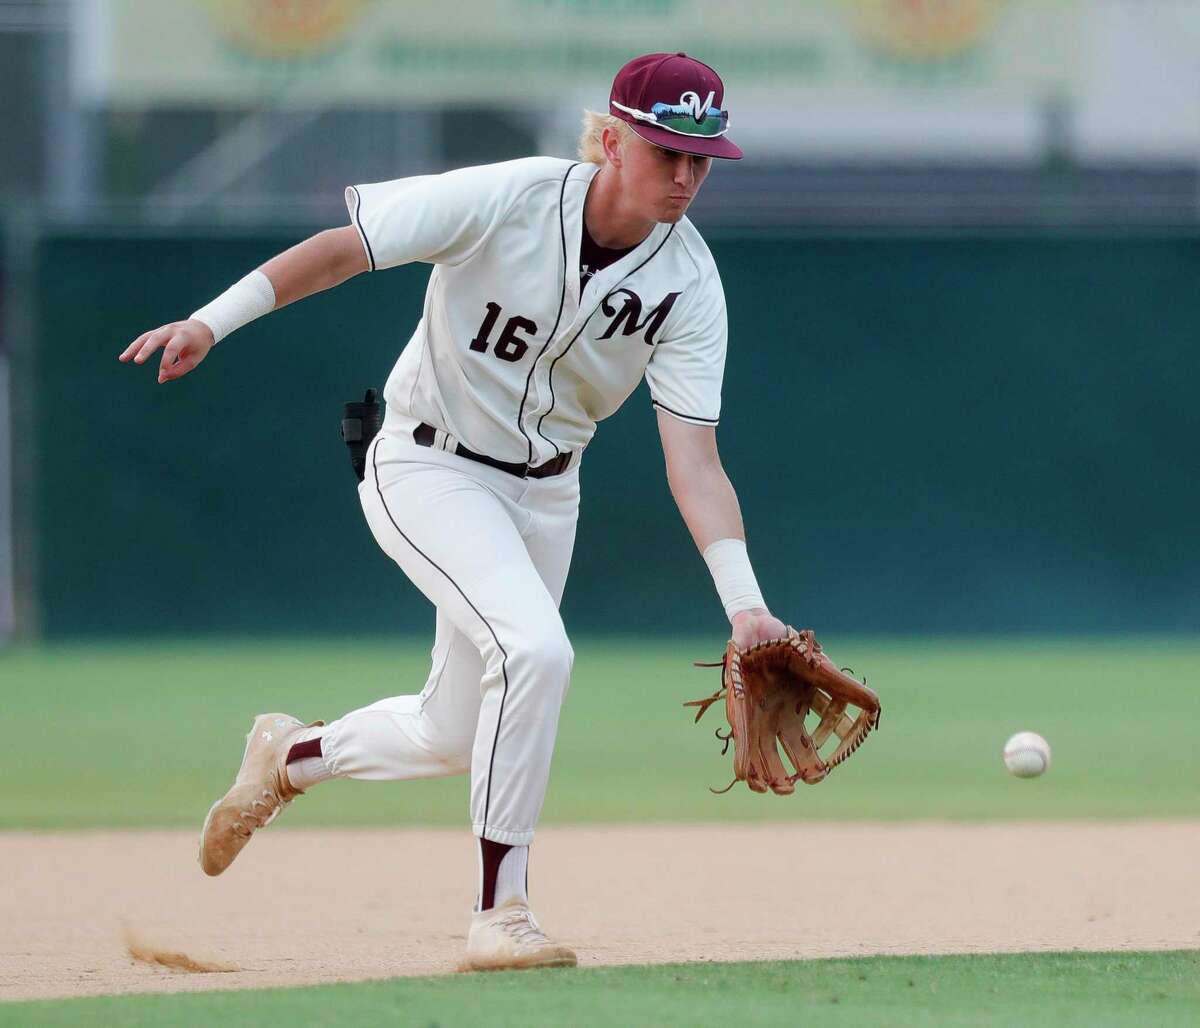 Magnolia third baseman TJ Peters (16) fields a ground ball by Samson Pugh #10 of Lake Creek in the first inning of Game 2 of a Region III-5A quarterfinal high school baseball playoff series at Magnolia High School, Friday, 20, 2022, in Magnolia.